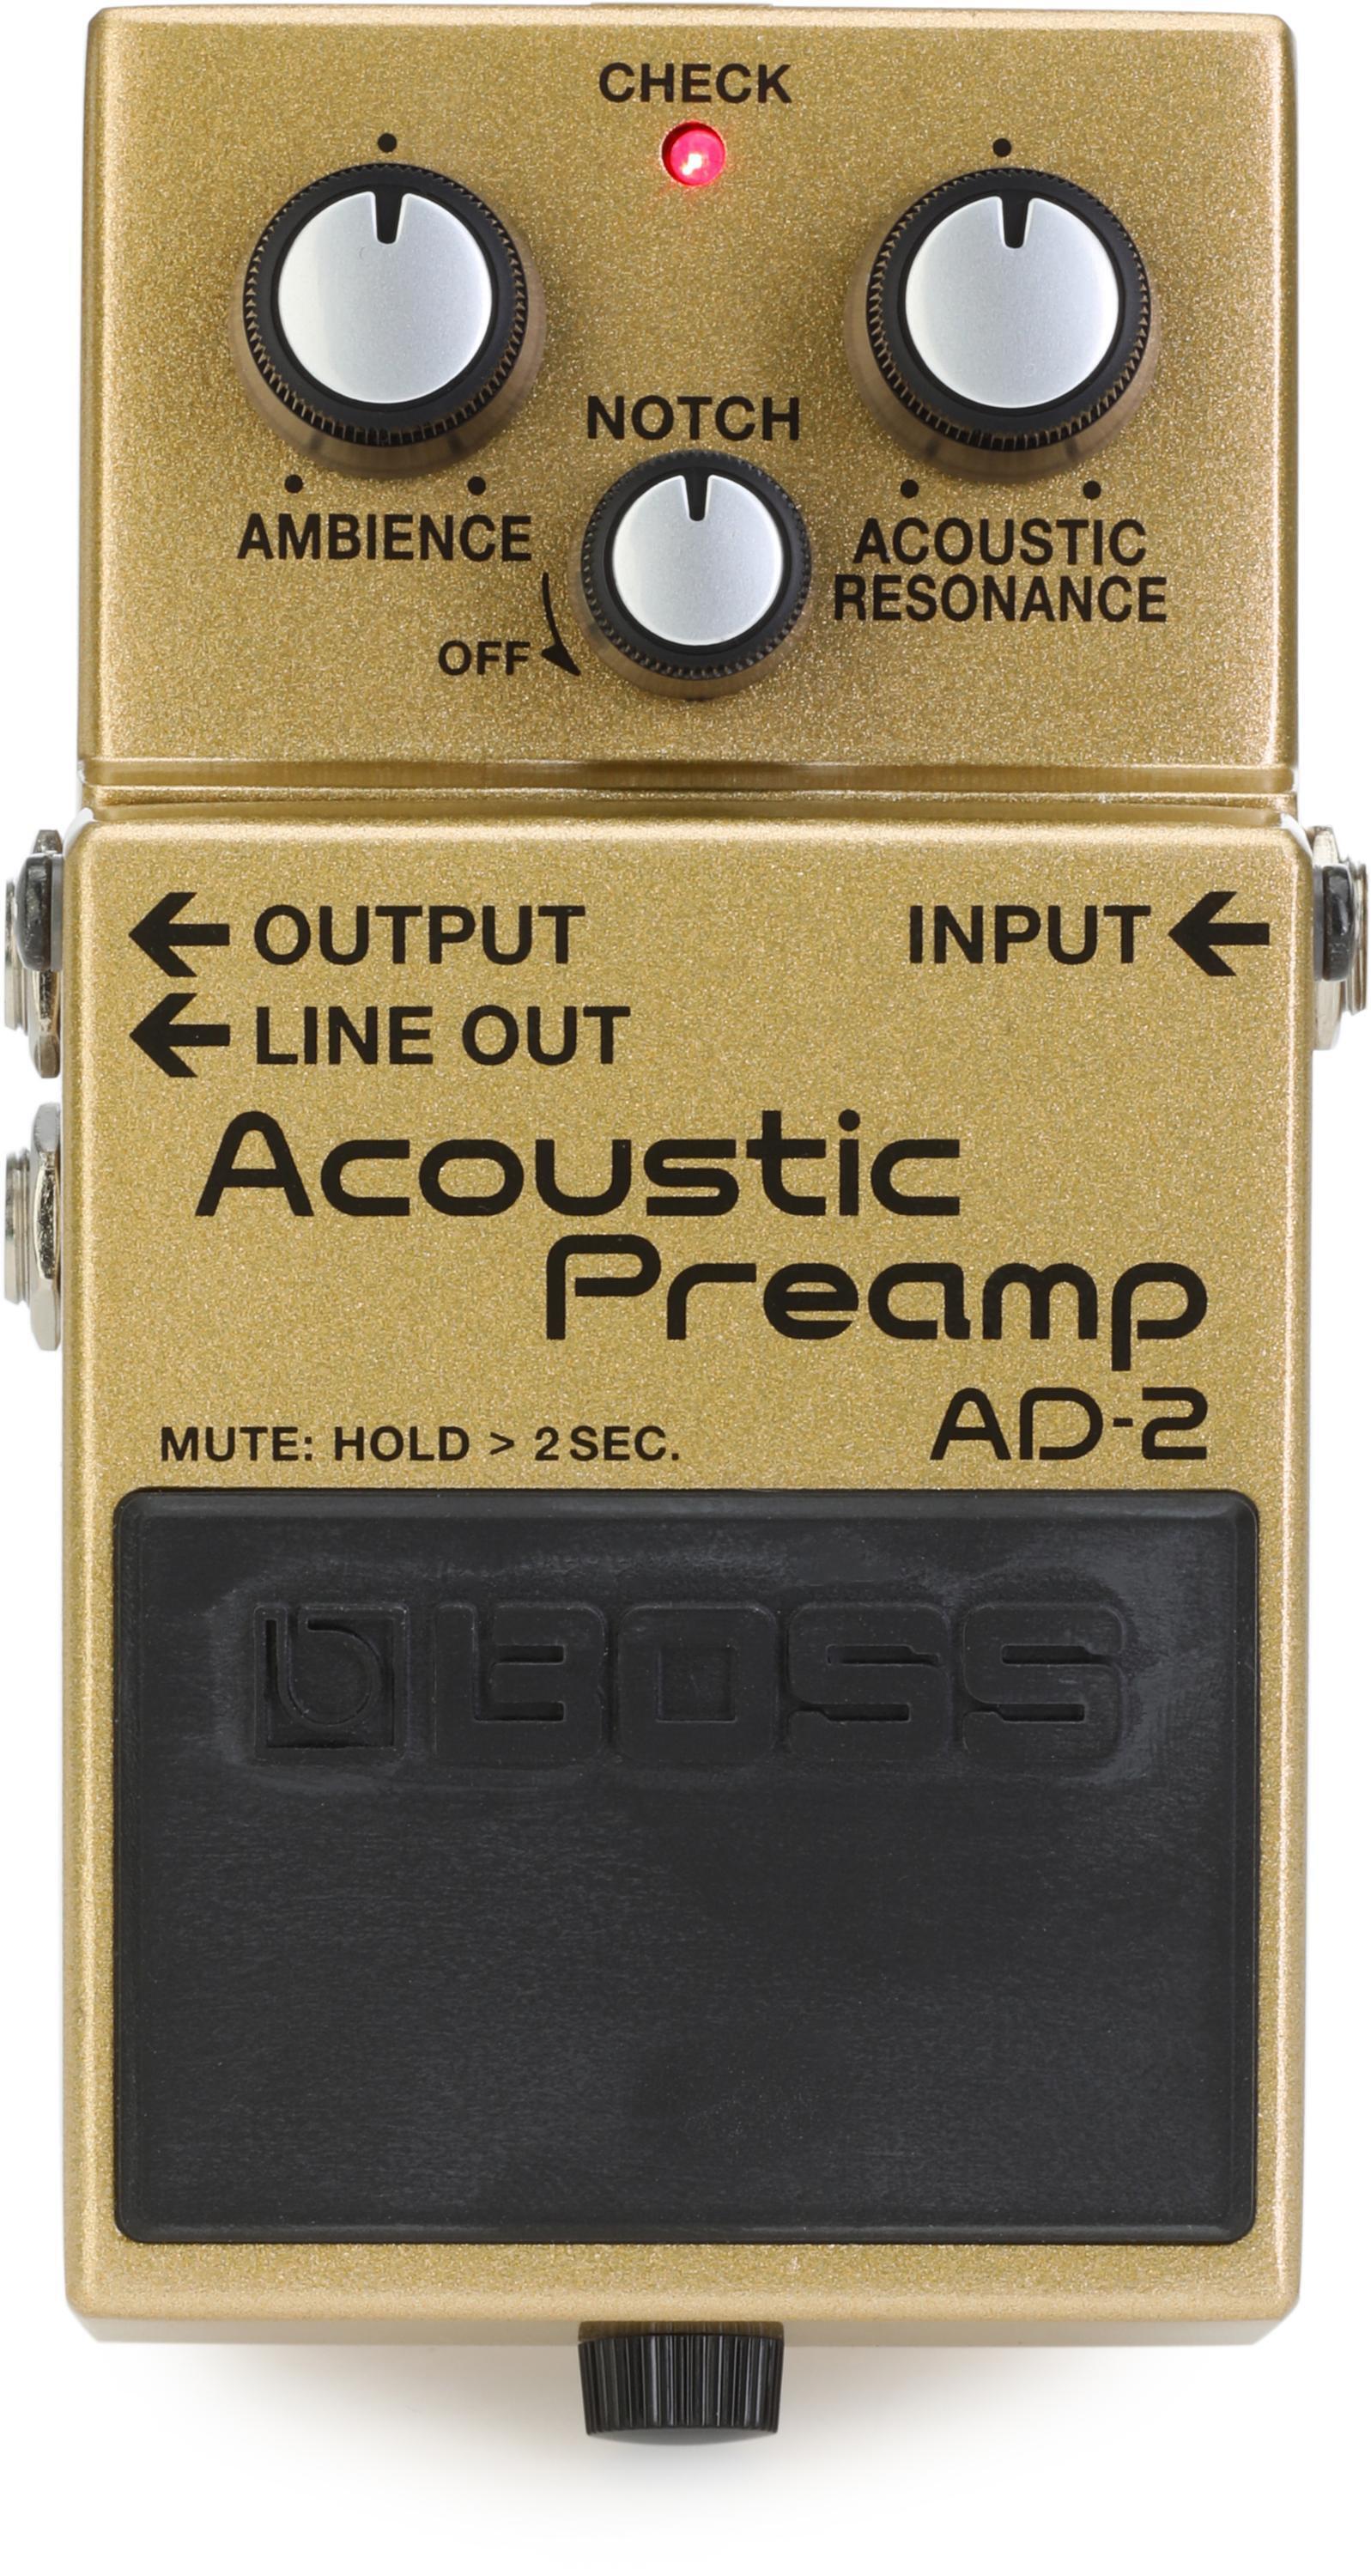 Bundled Item: Boss AD-2 Acoustic Preamp Pedal